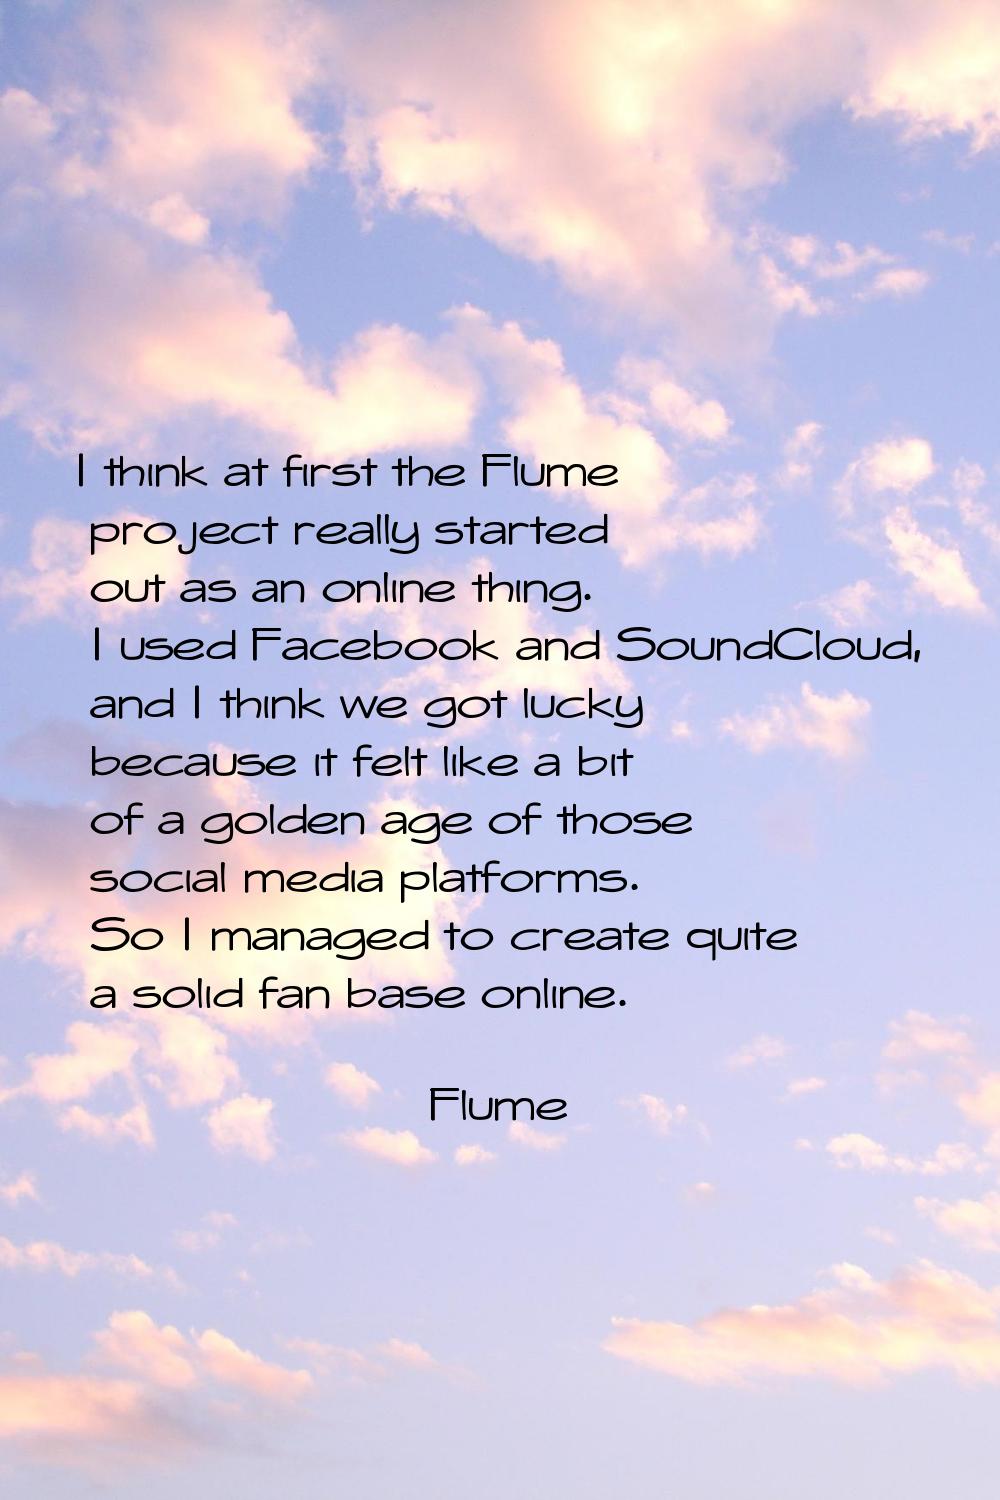 I think at first the Flume project really started out as an online thing. I used Facebook and Sound